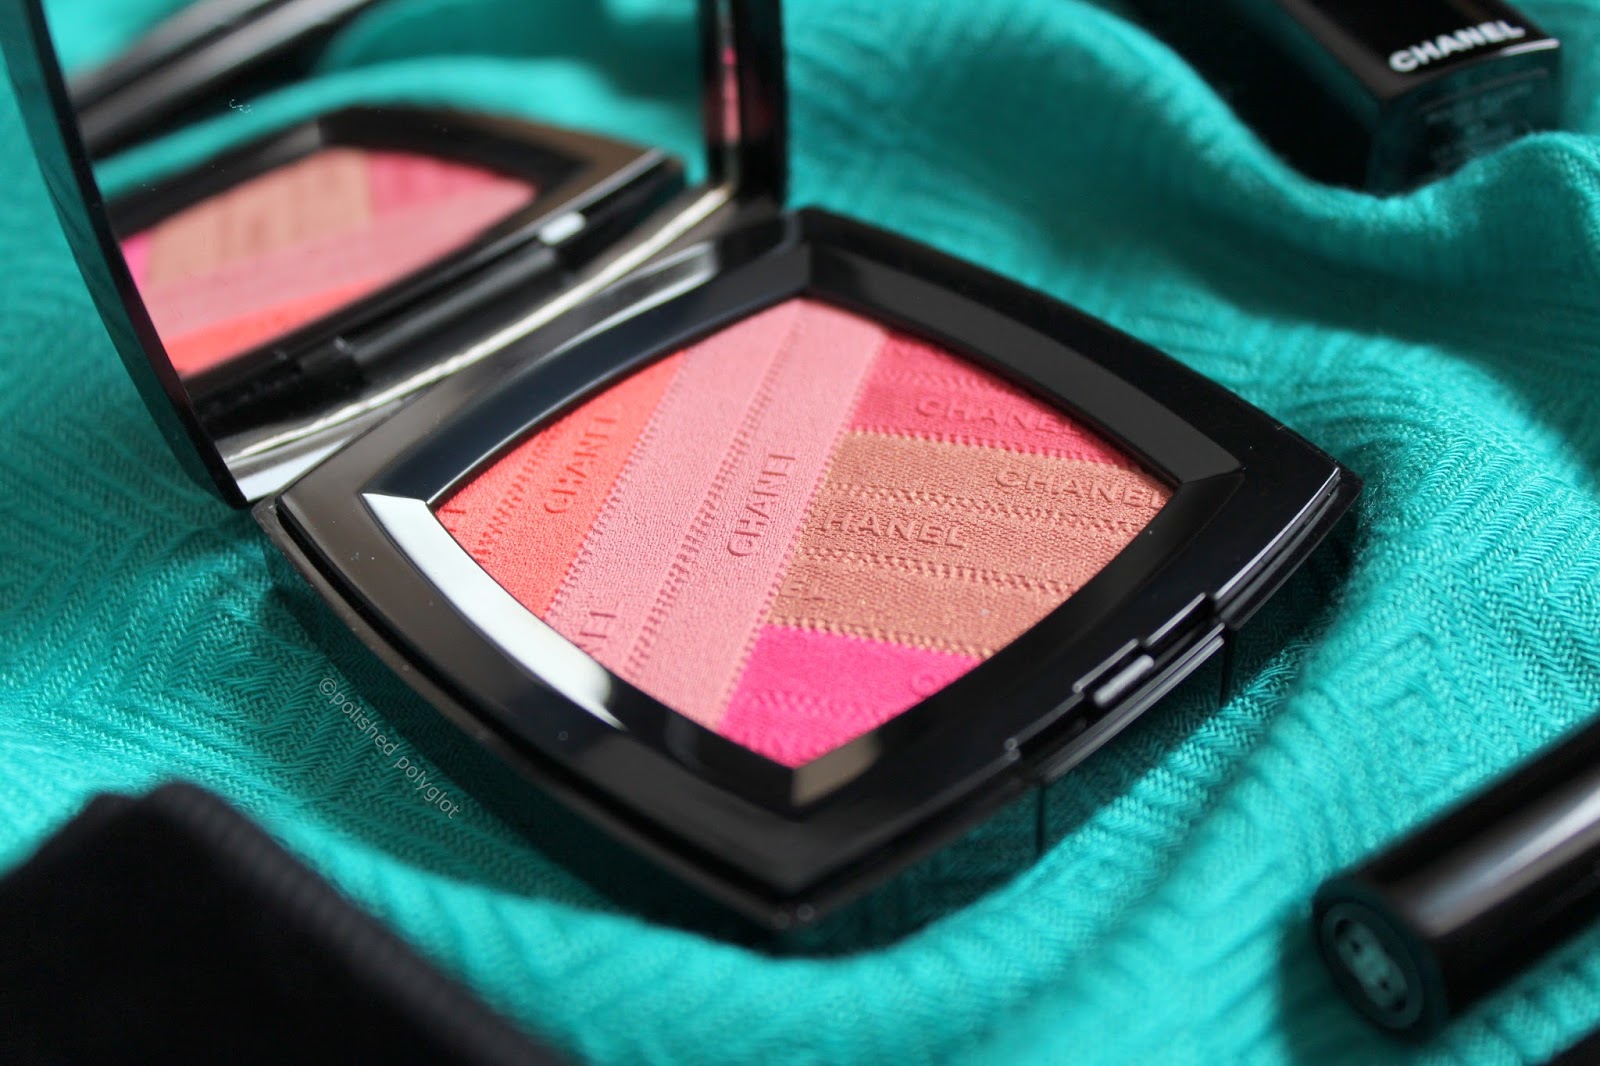 Chanel Sunkiss Ribbon blush. Too pretty to be resisted / Polished